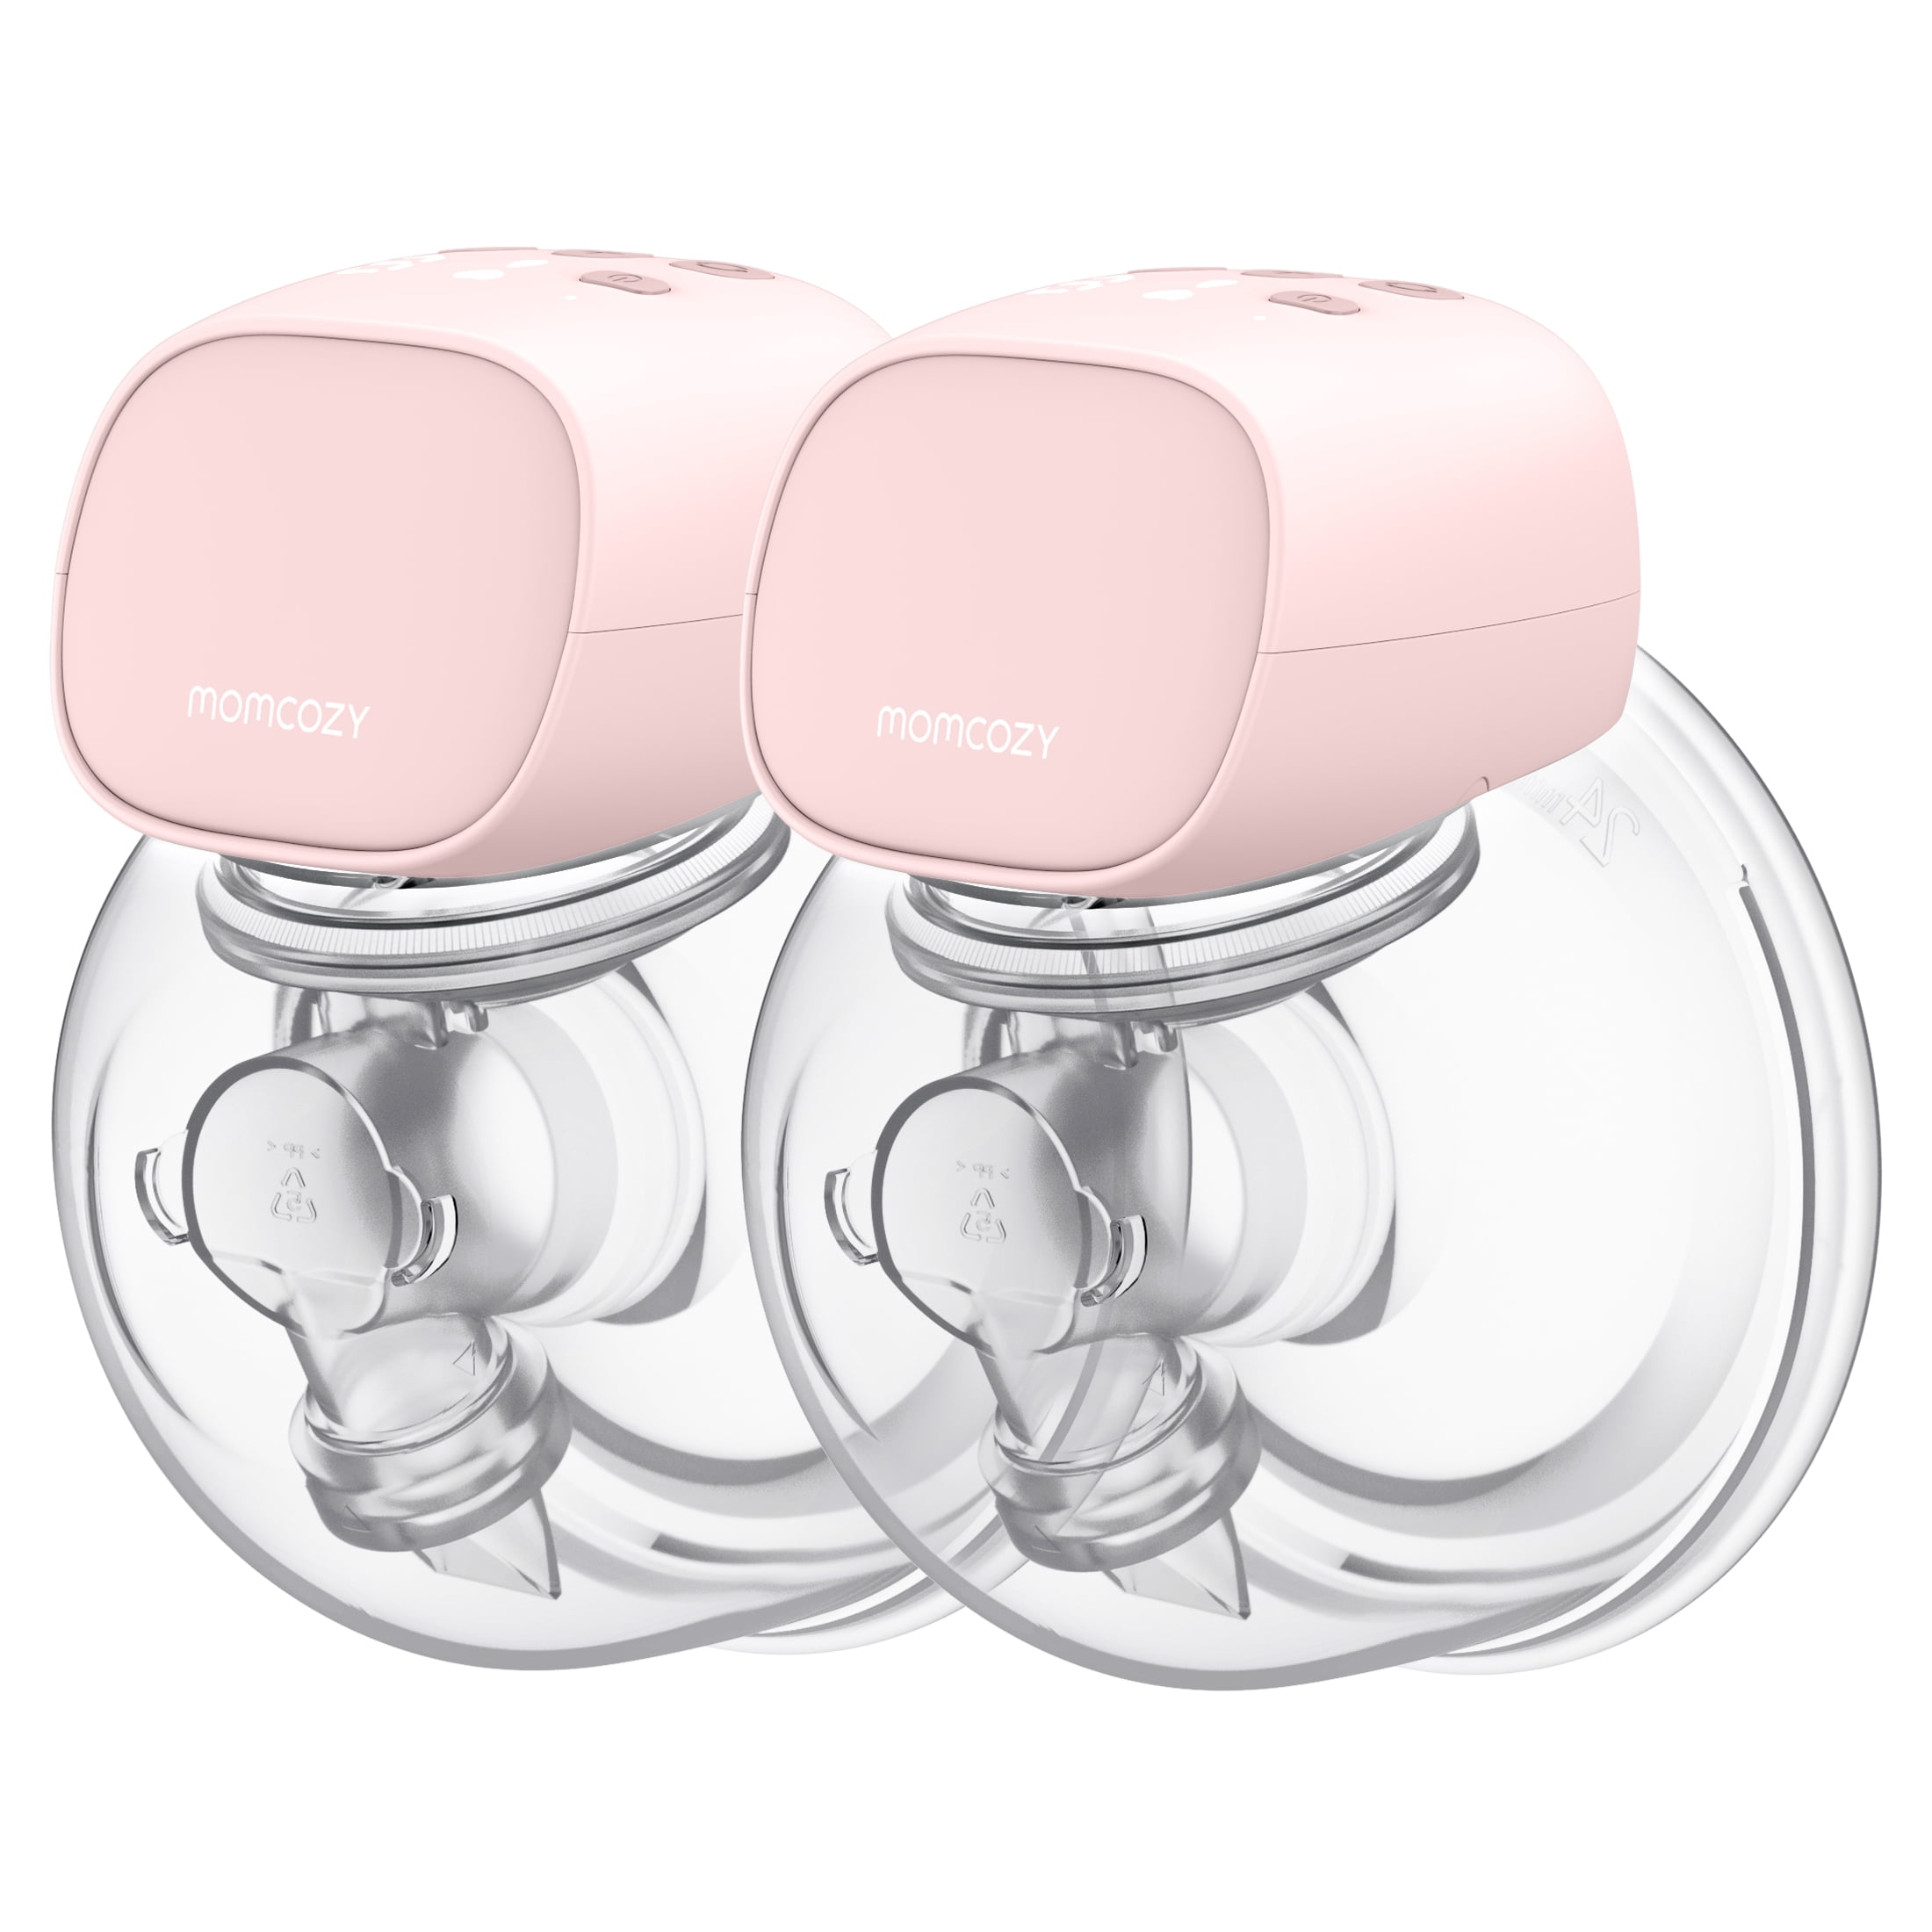 Momcozy Double Wearable Breast Pump S9 Pro, Mom Cozy Free Hands